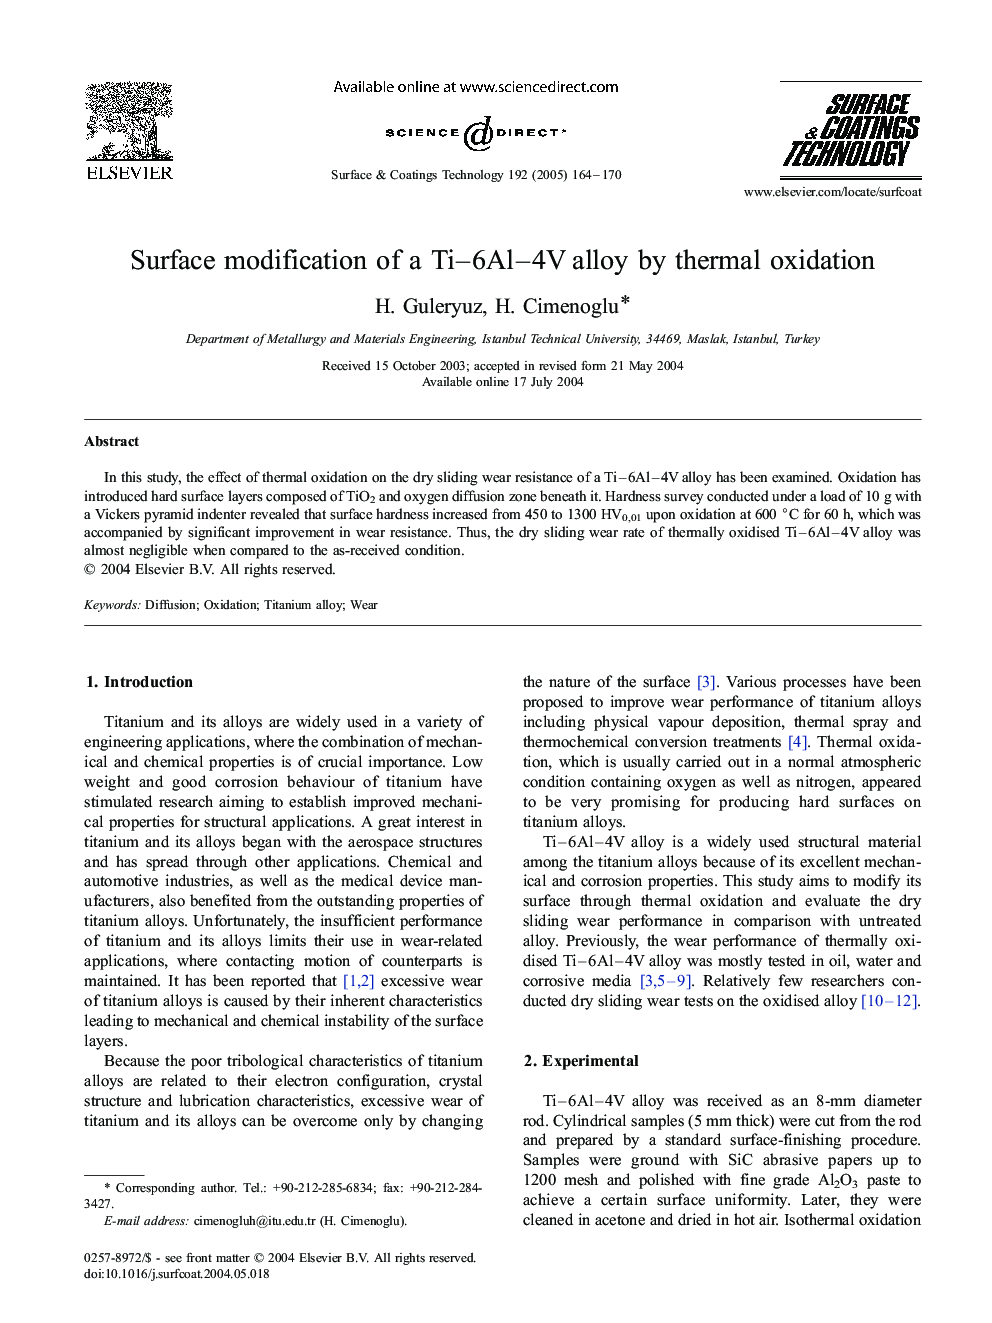 Surface modification of a Ti-6Al-4V alloy by thermal oxidation